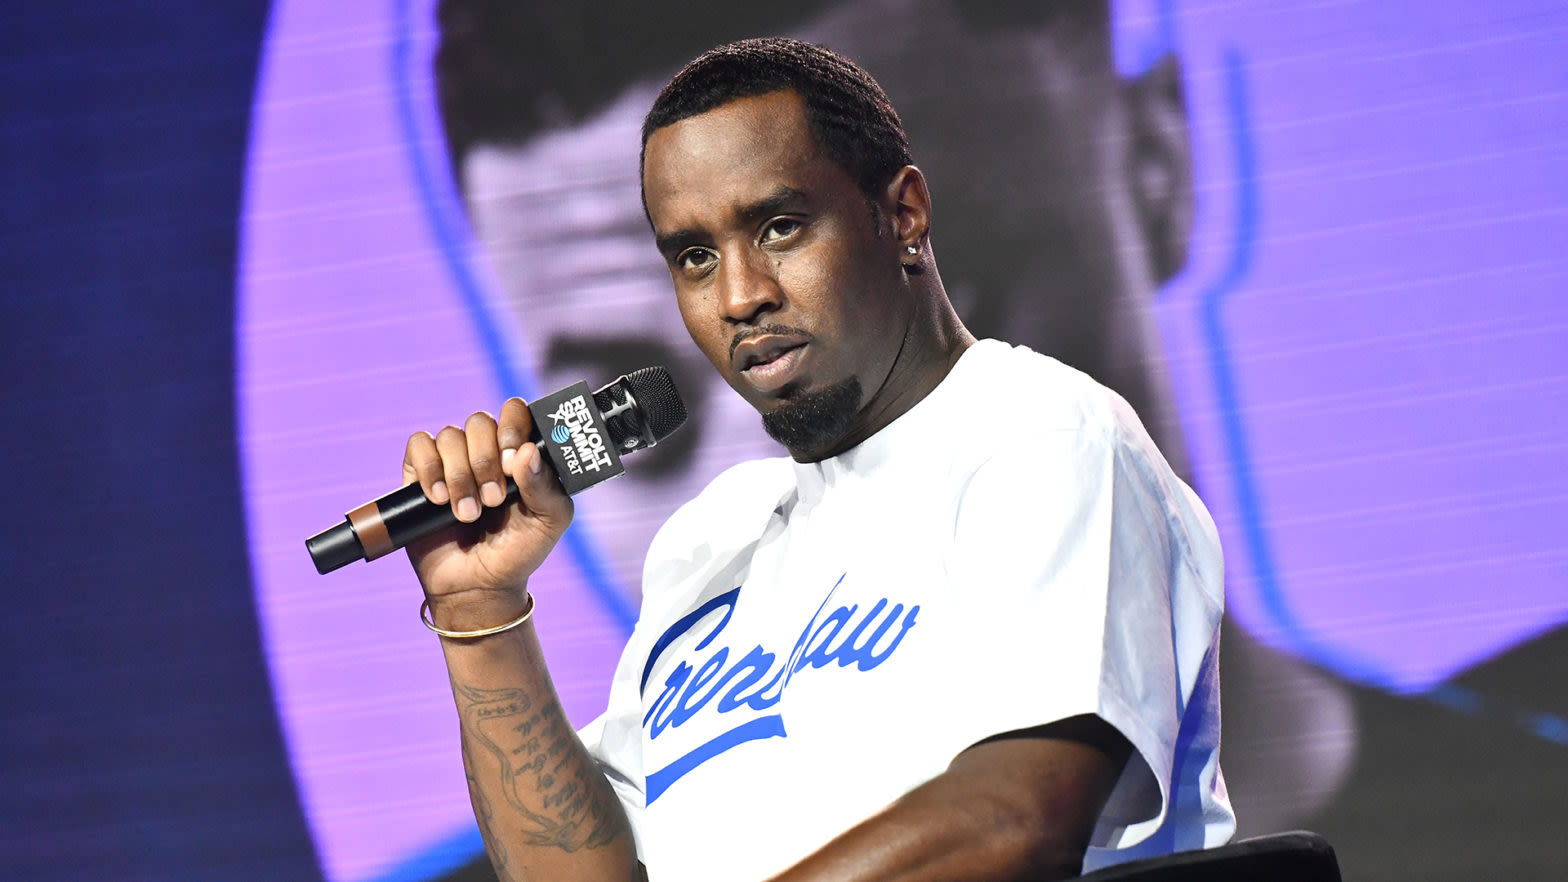 Who Owns Revolt Following Sean ‘Diddy’ Combs’ Exit?